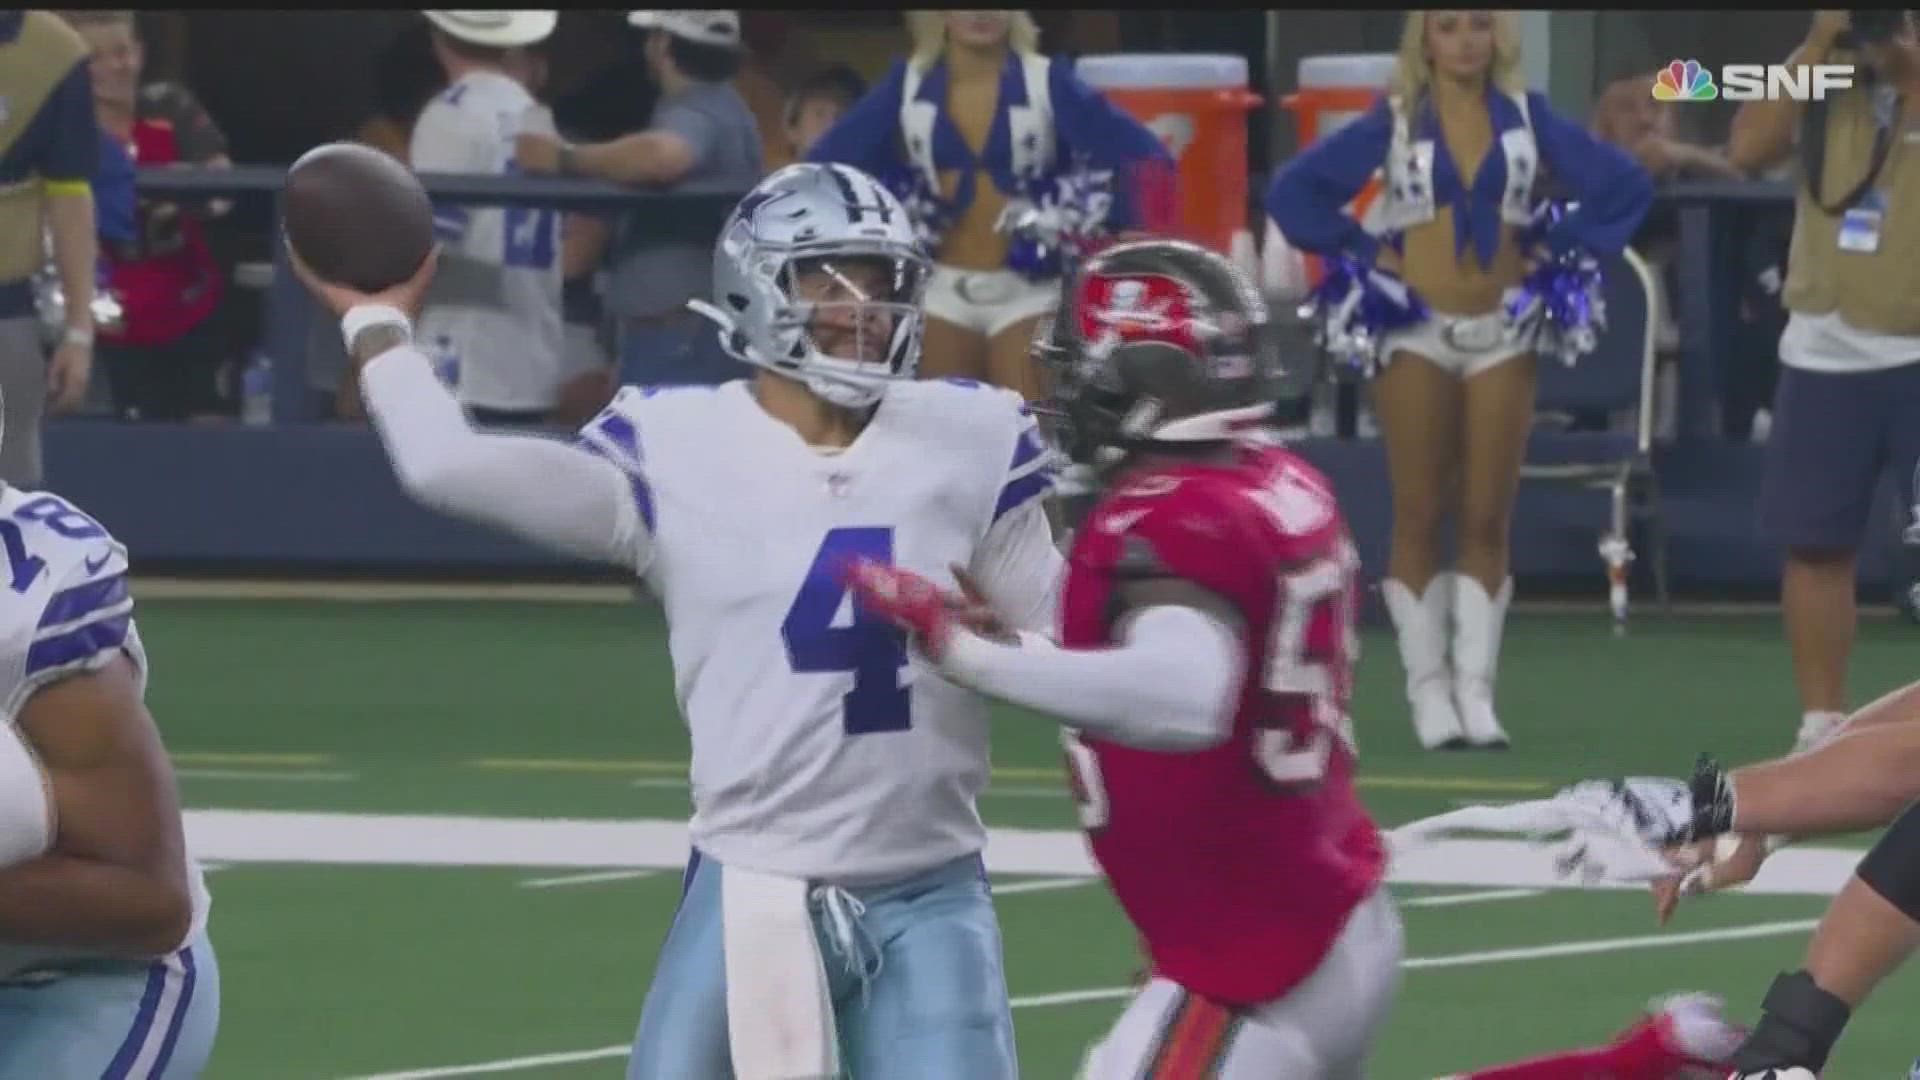 Prescott appeared to hurt his right thumb while hitting it against a Bucs defender's helmet after a throw. The team plans for him to have surgery on Monday.